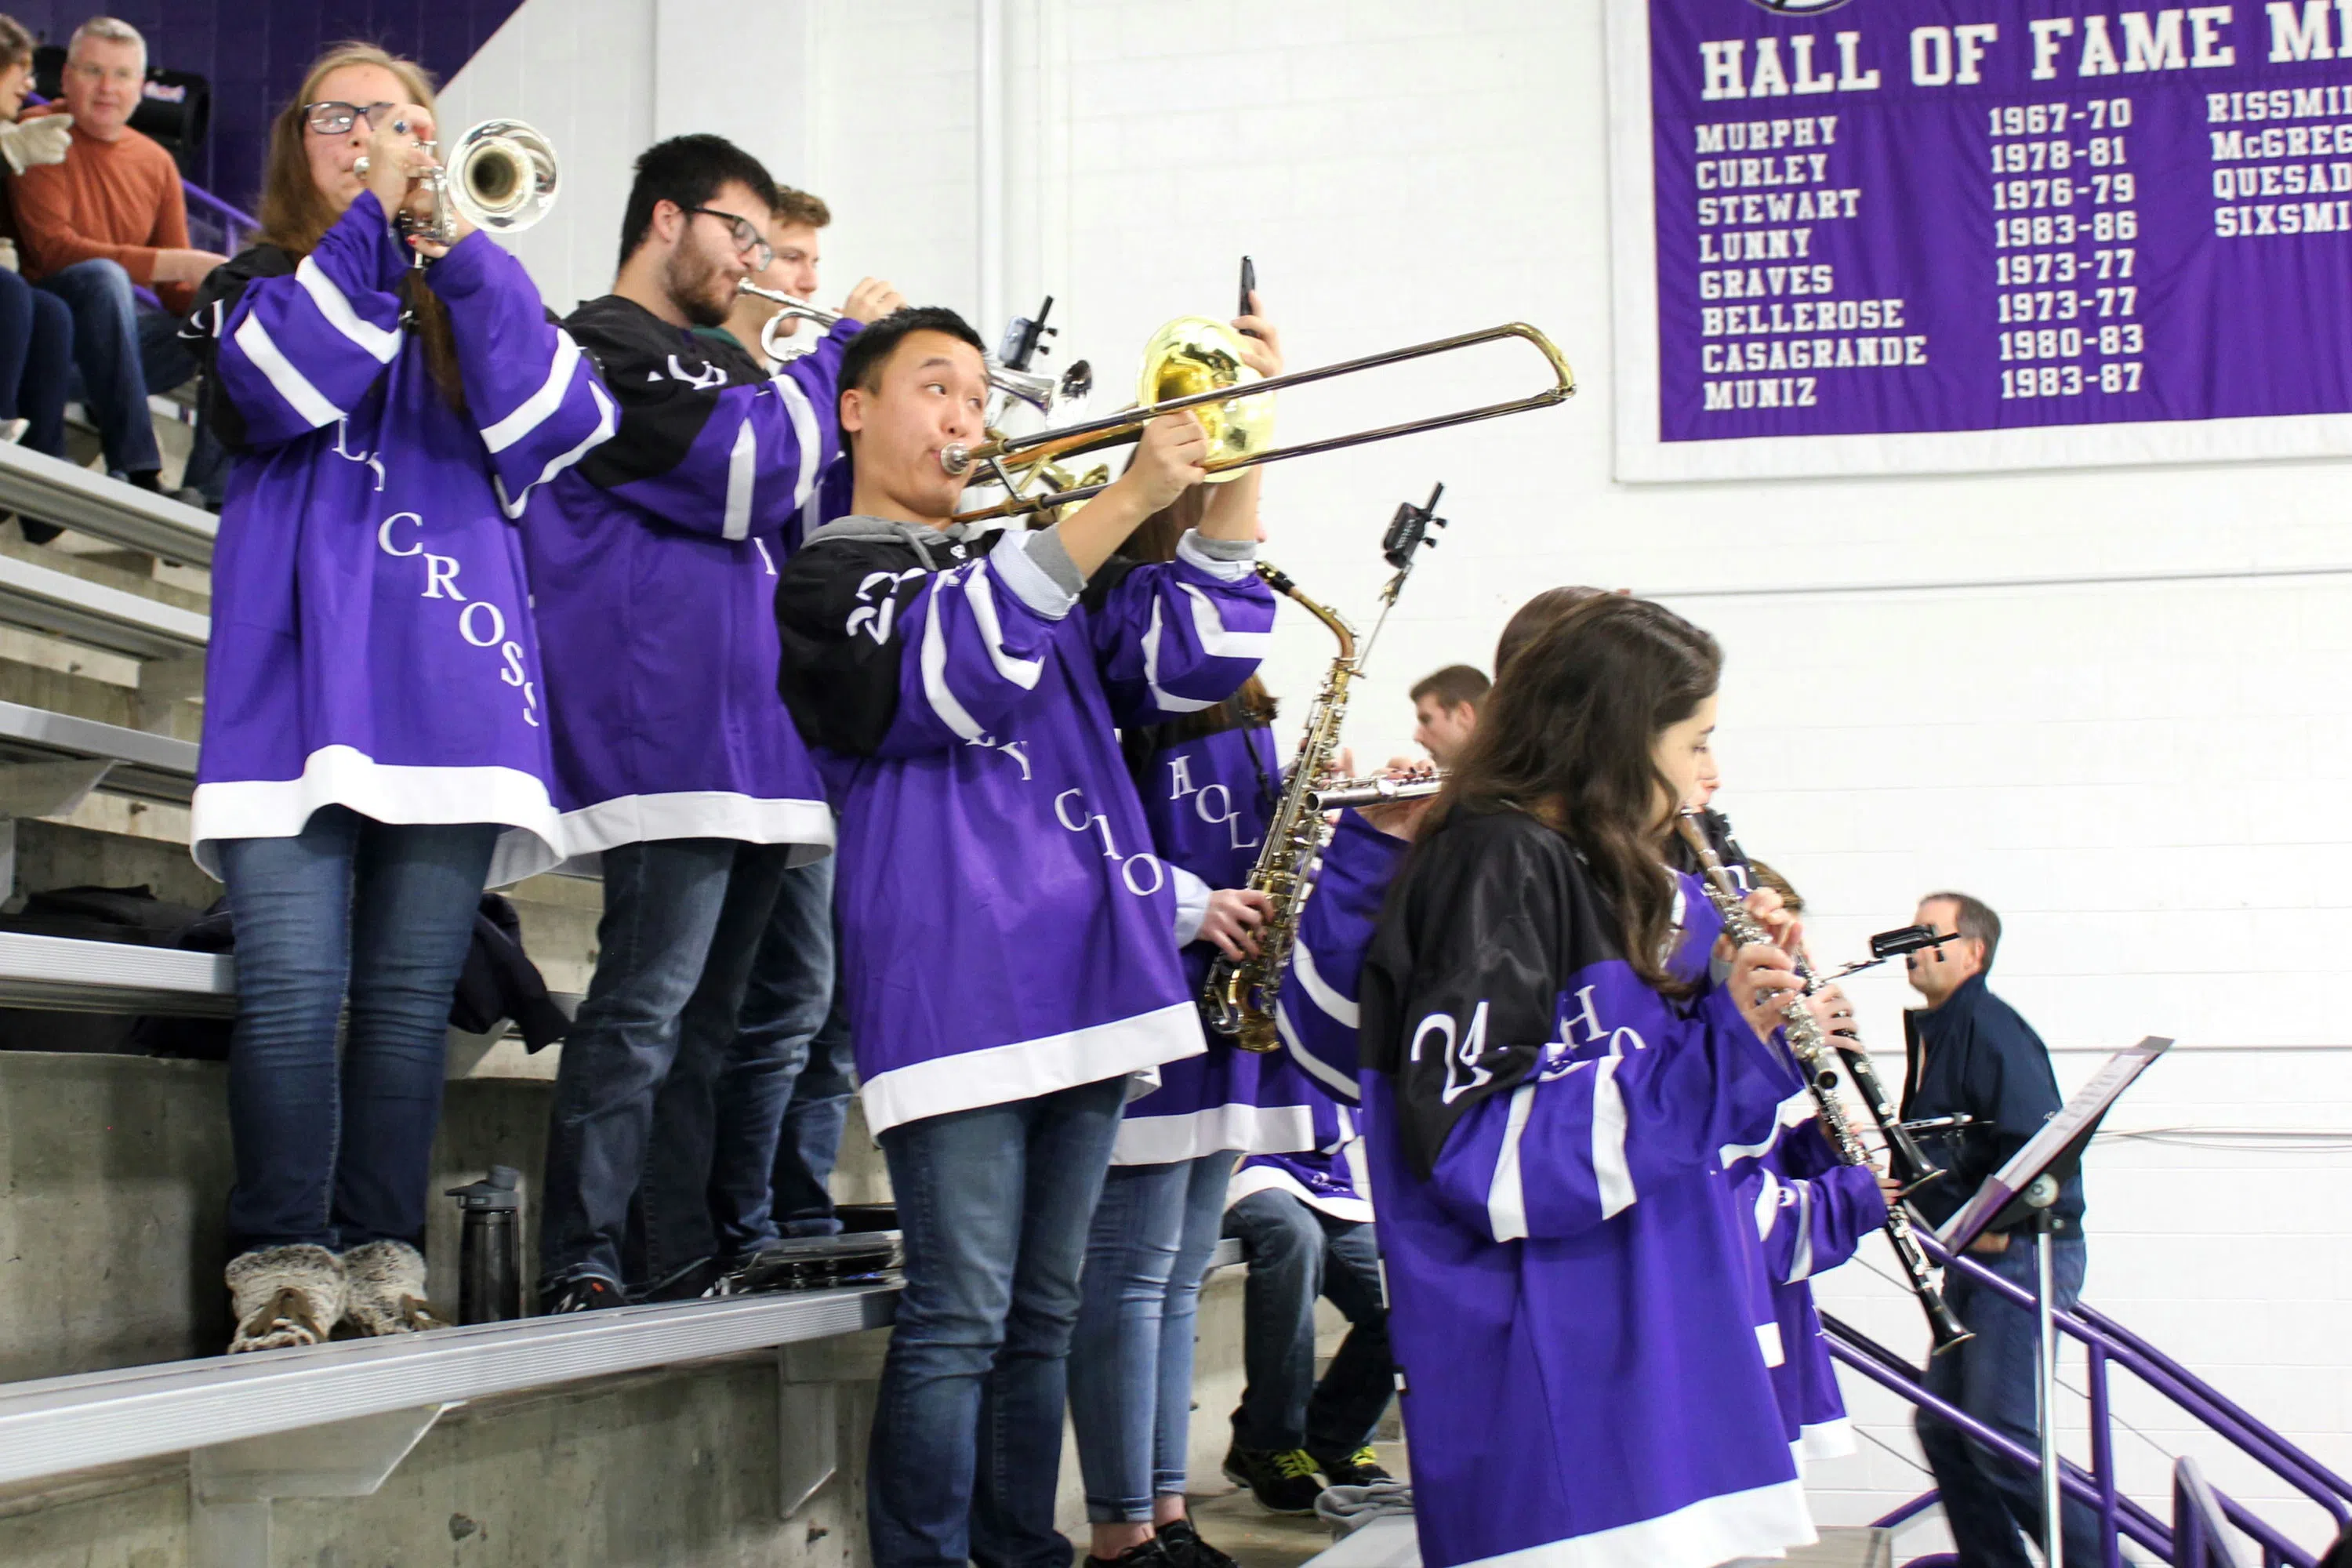 Student pep band performing in hockey rink